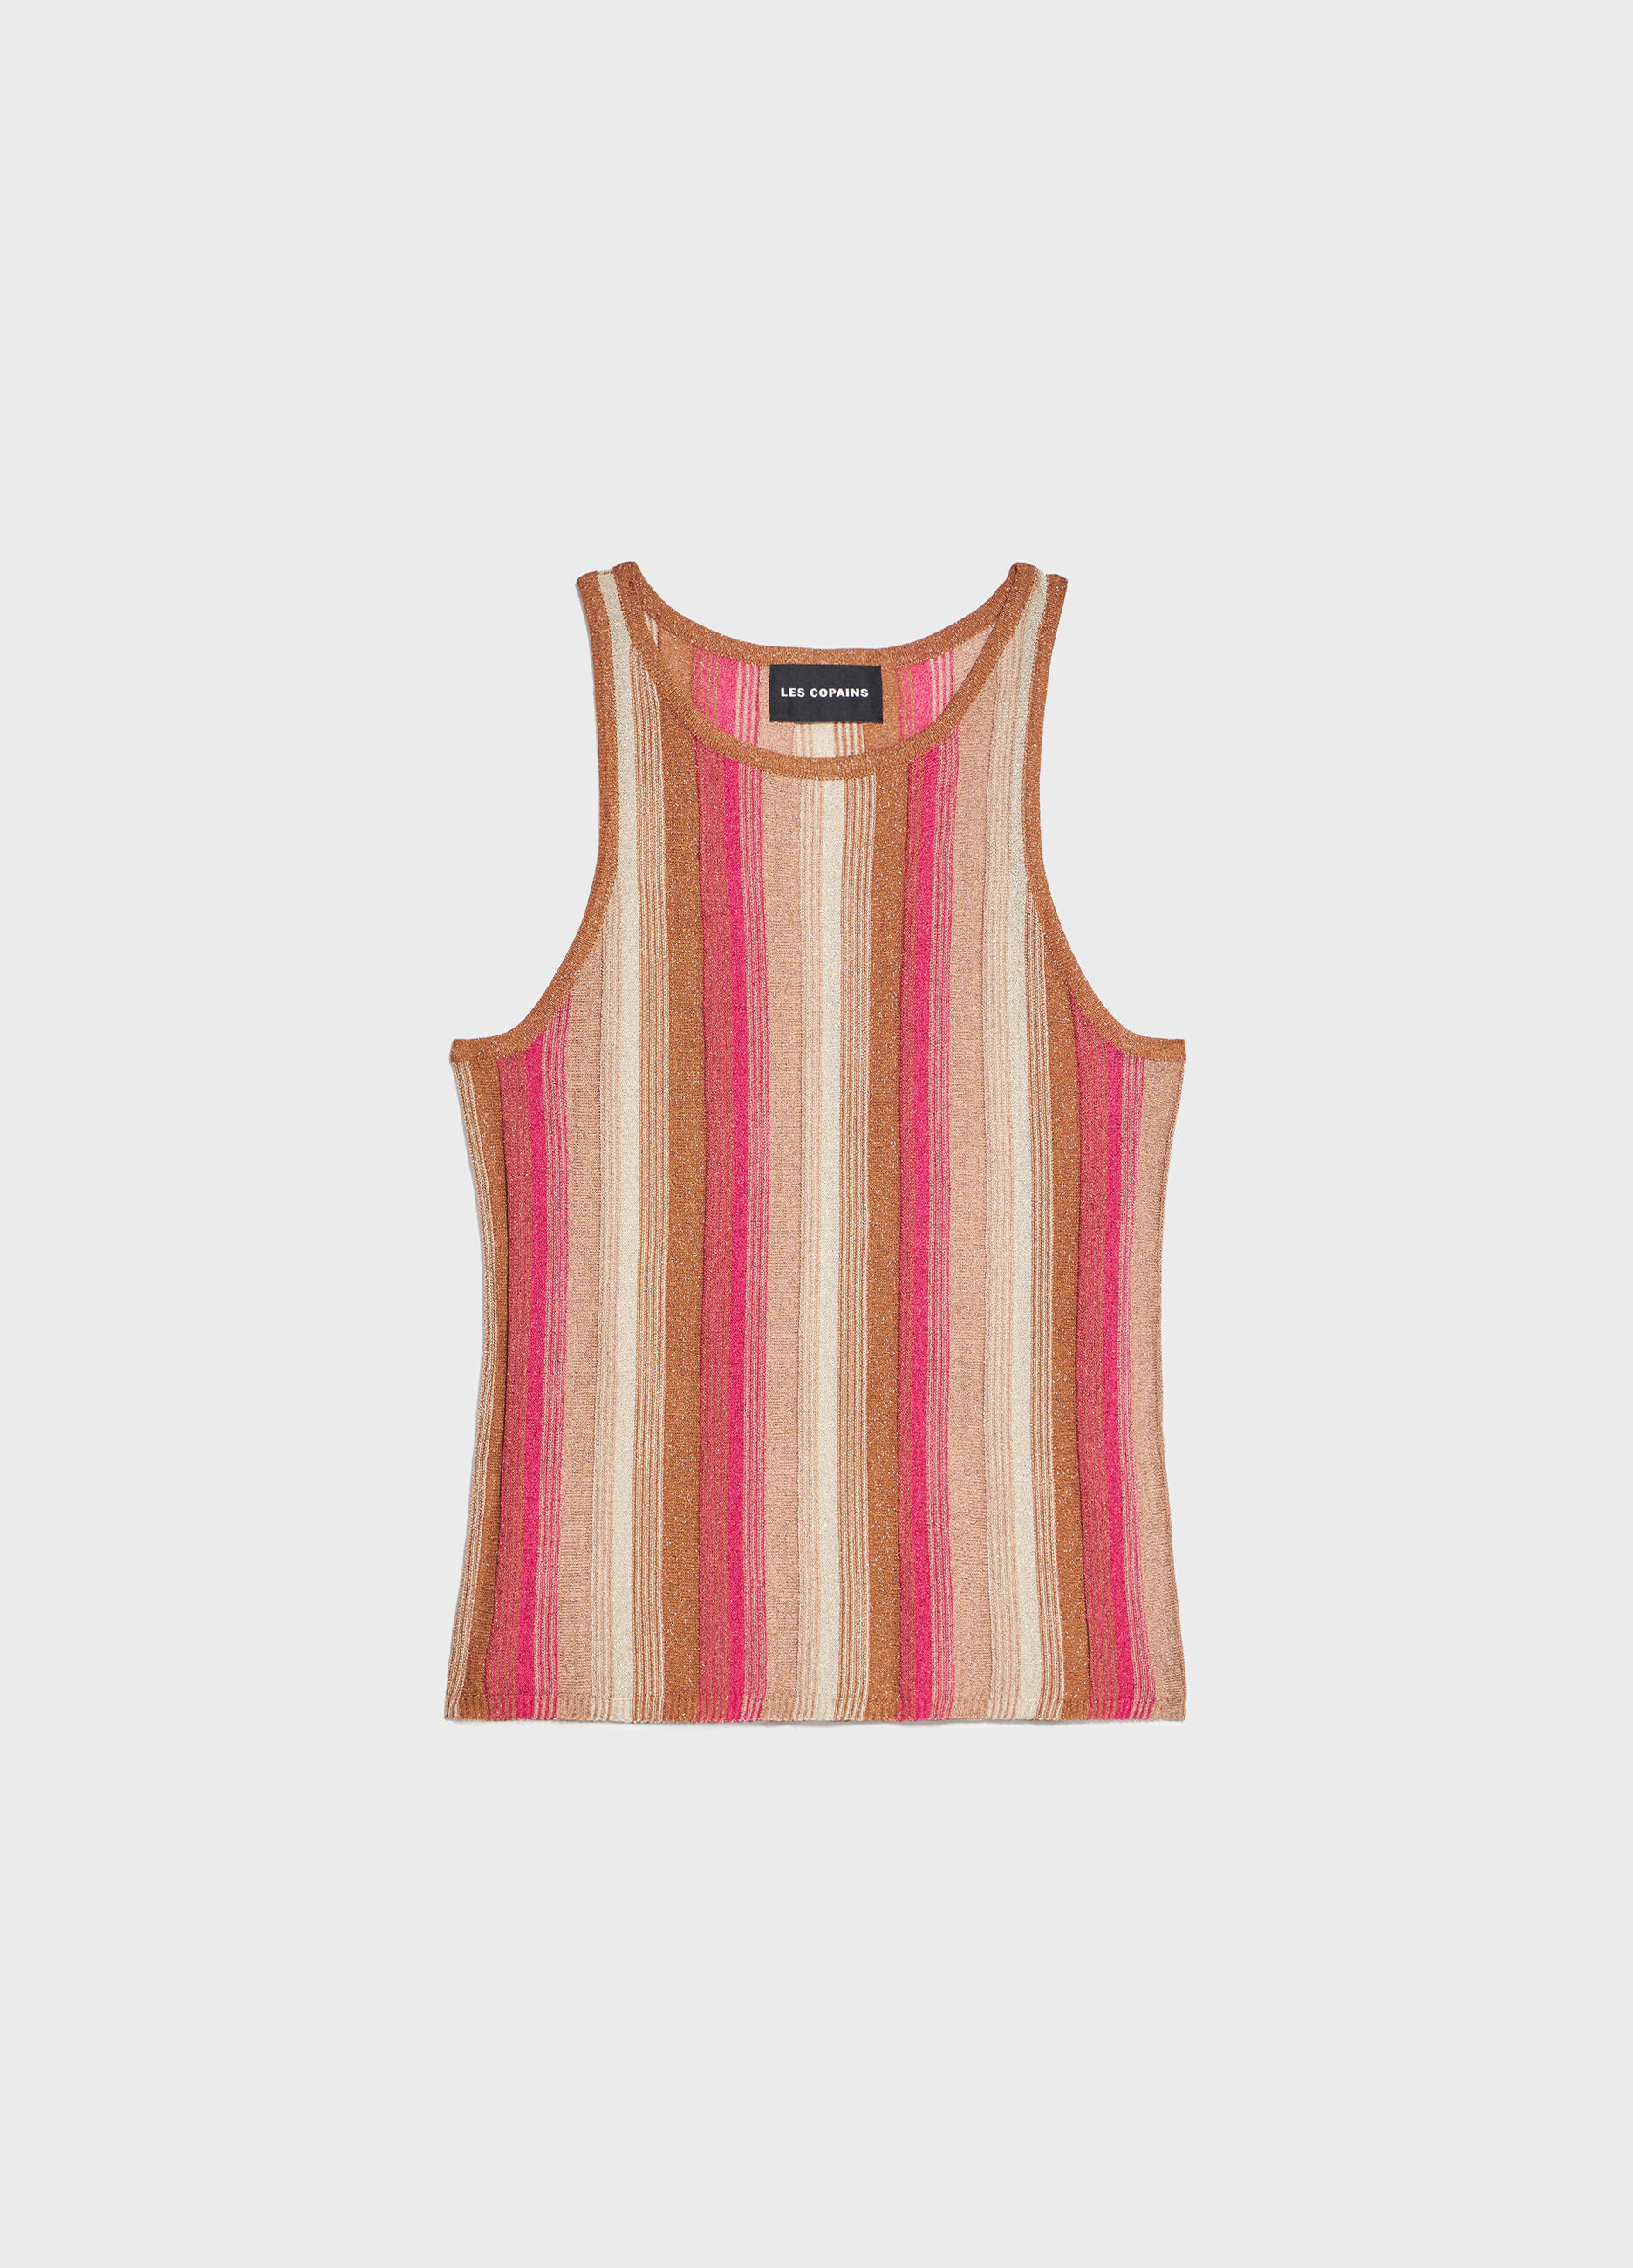 Pink and brown striped sleeveless top